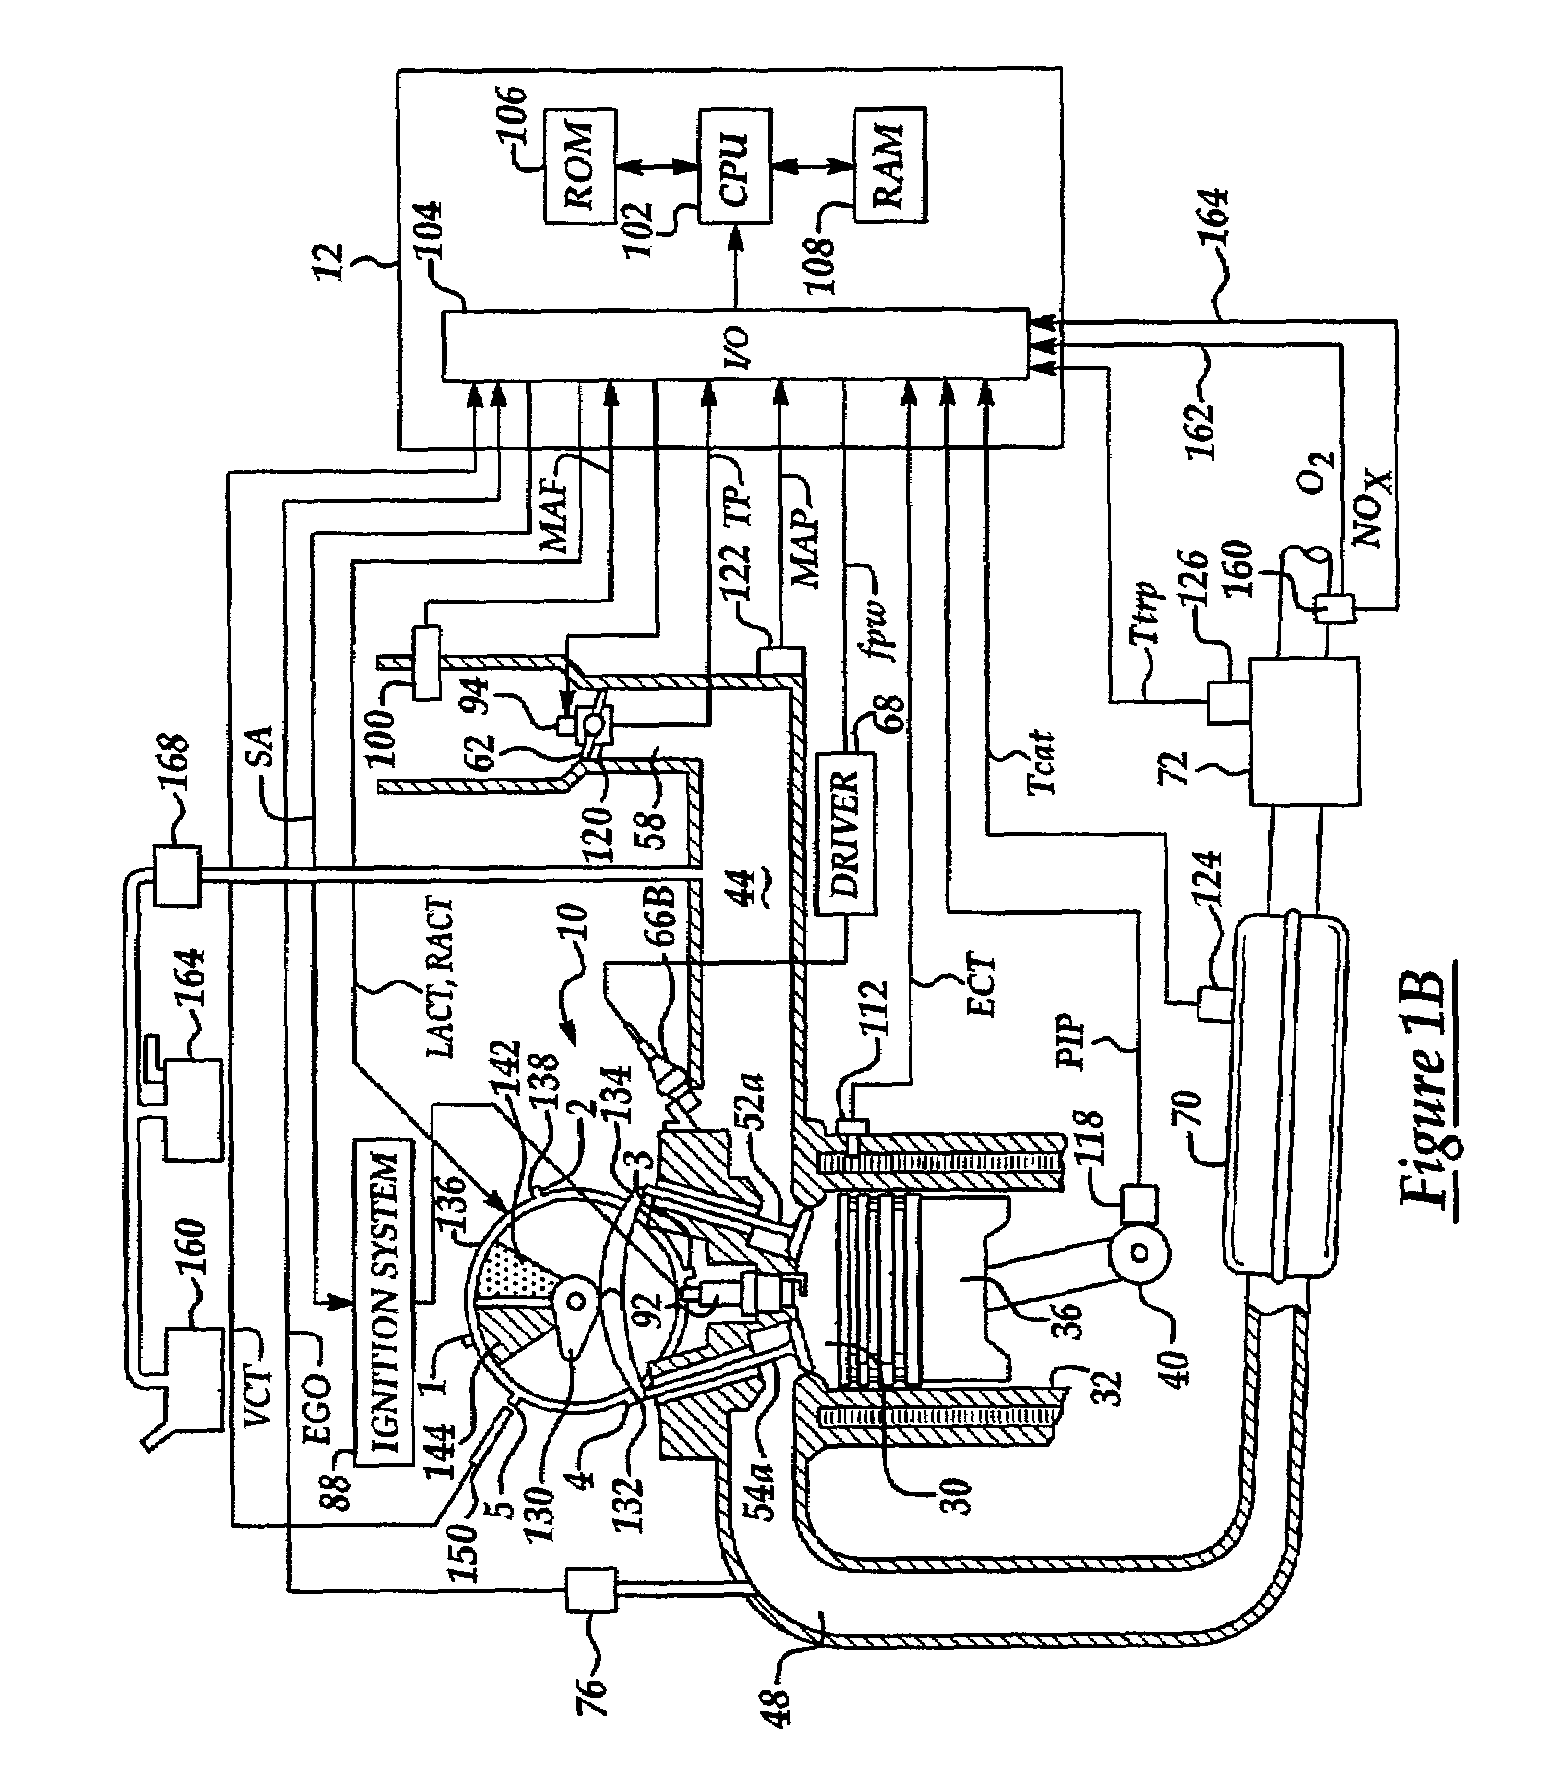 Method for controlling an engine to obtain rapid catalyst heating